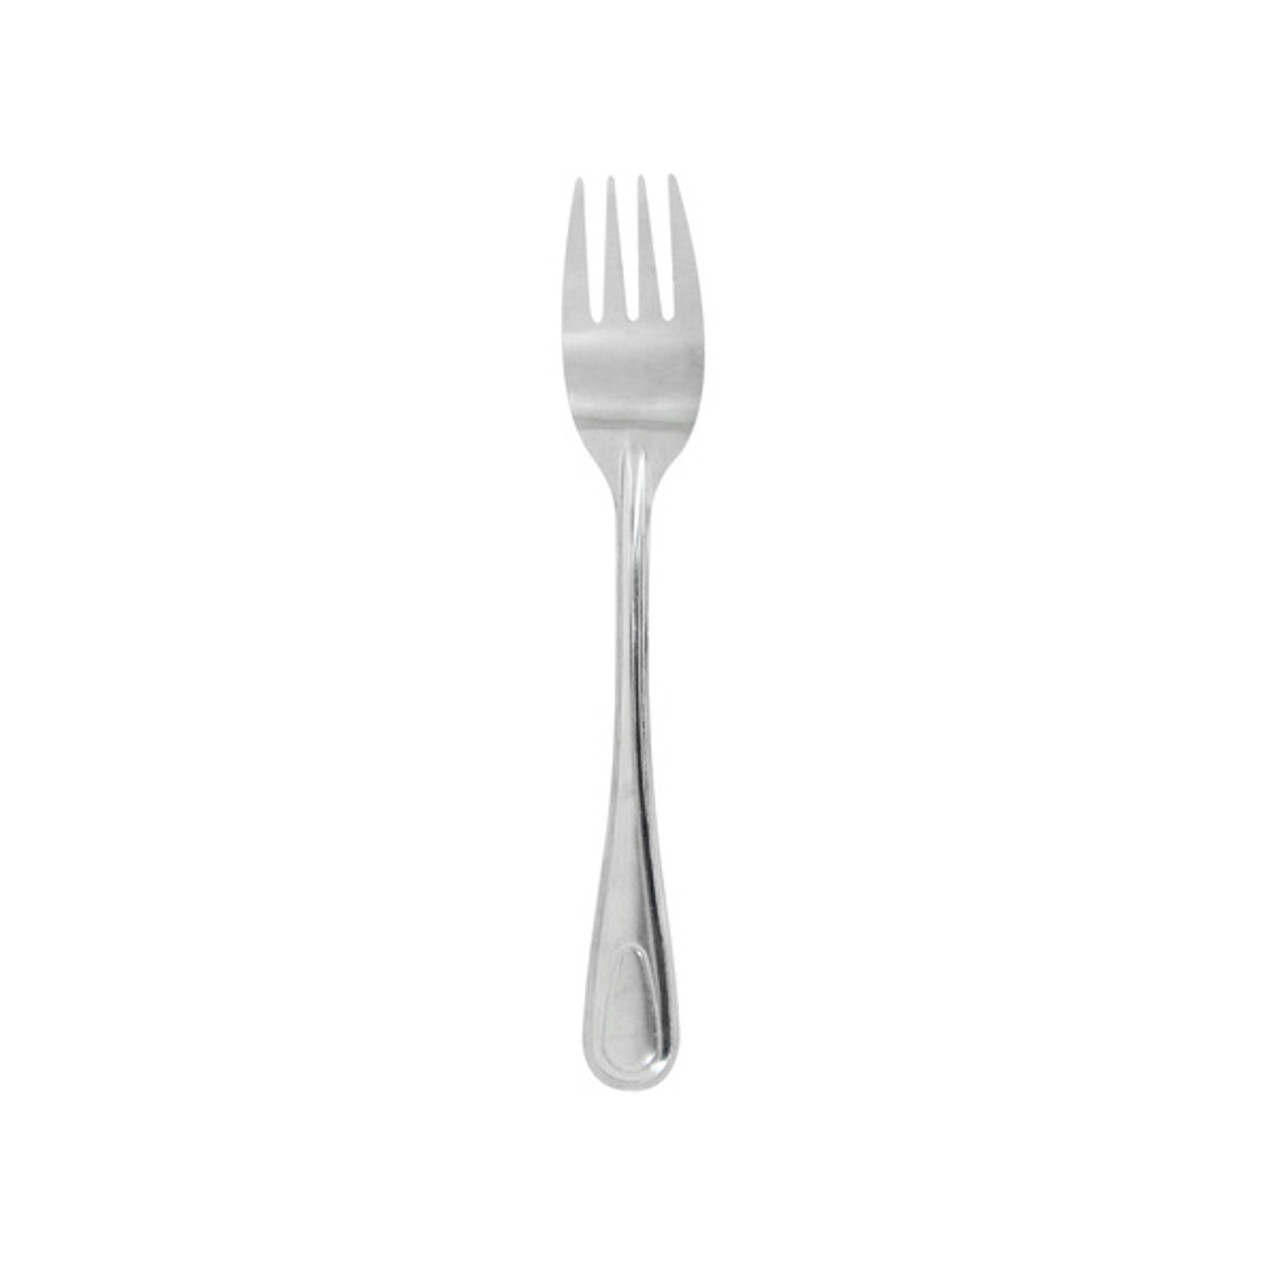 Reusable Stainless steel fork 6.34in - 50 pcs